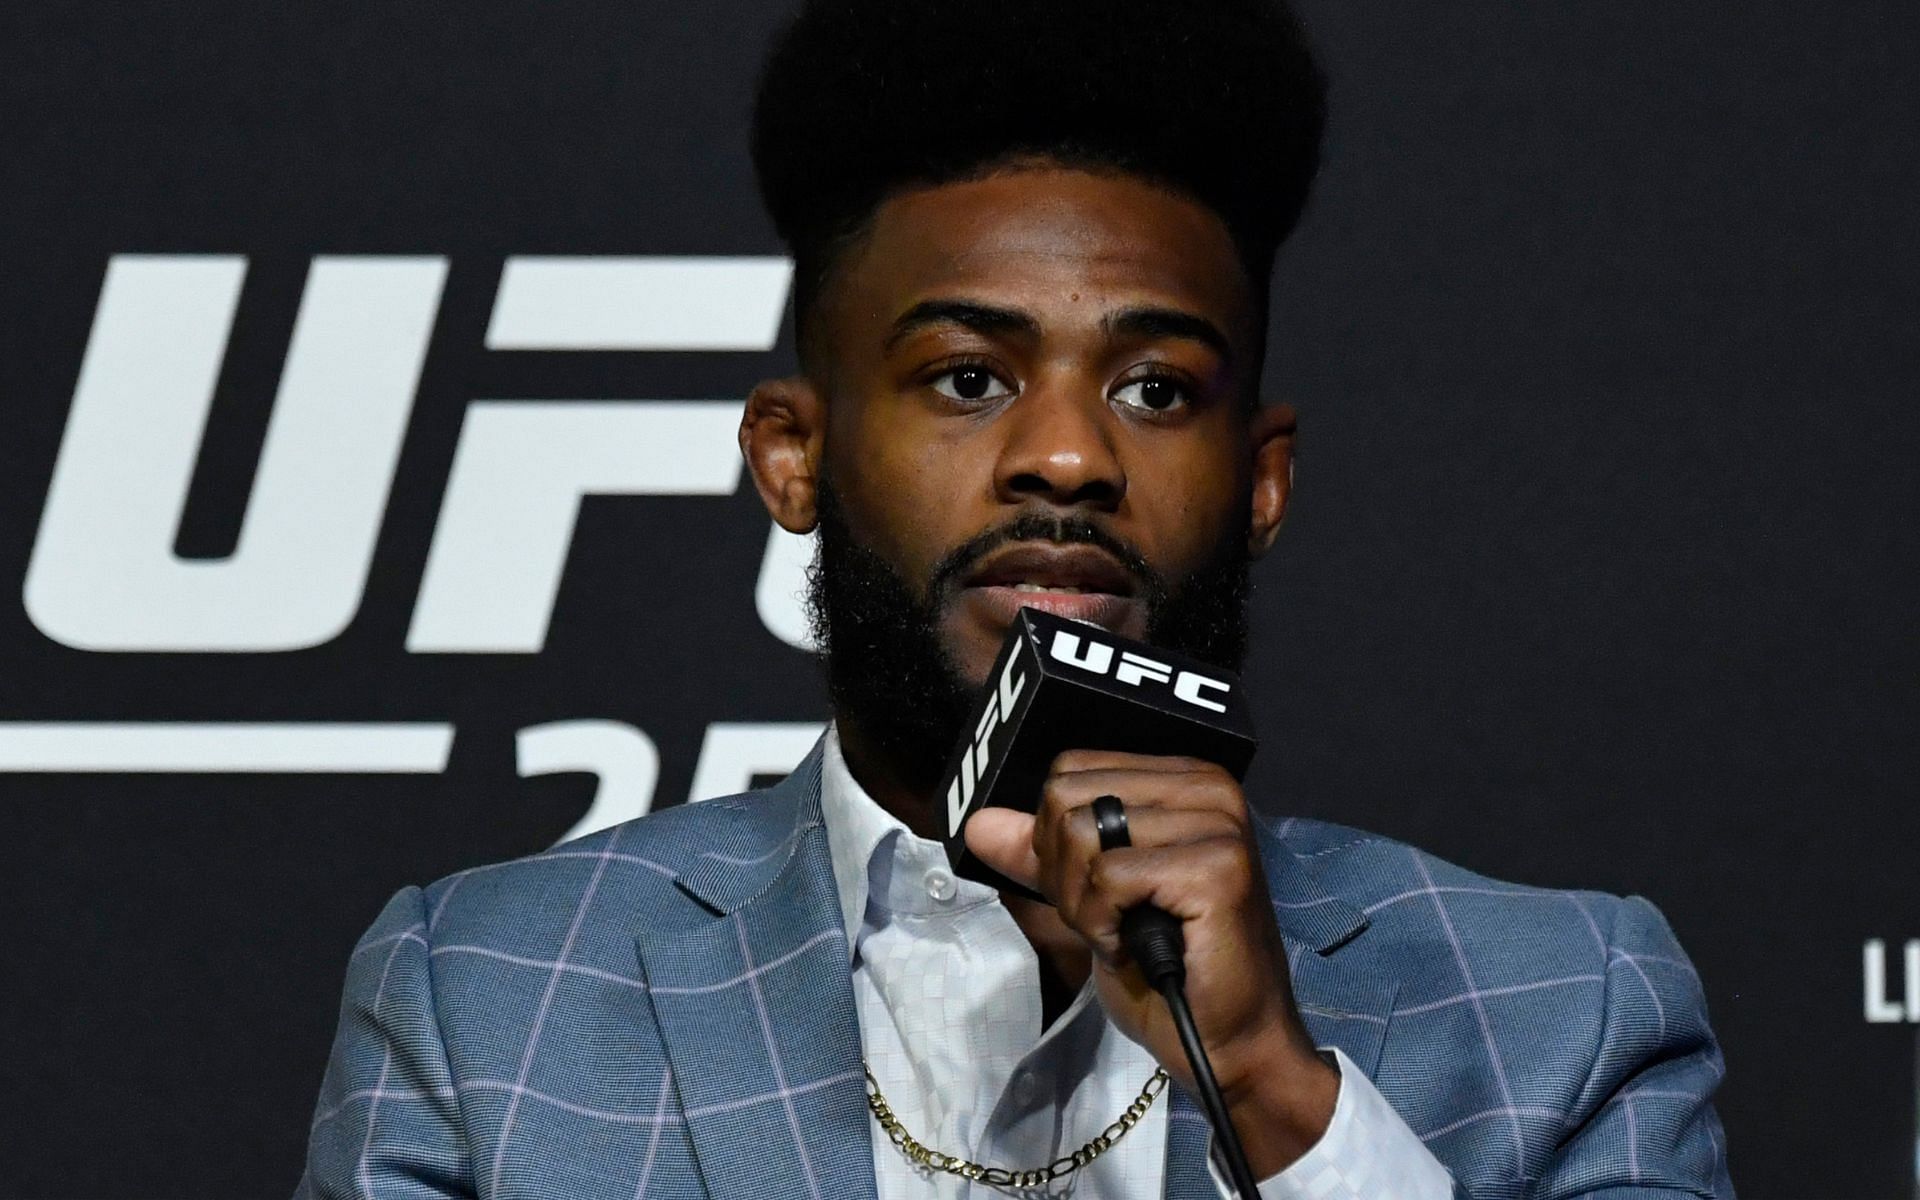 UFC bantamweight champion Aljamain Sterling has a close eye on his division, names potential title contenders in tournament bracket